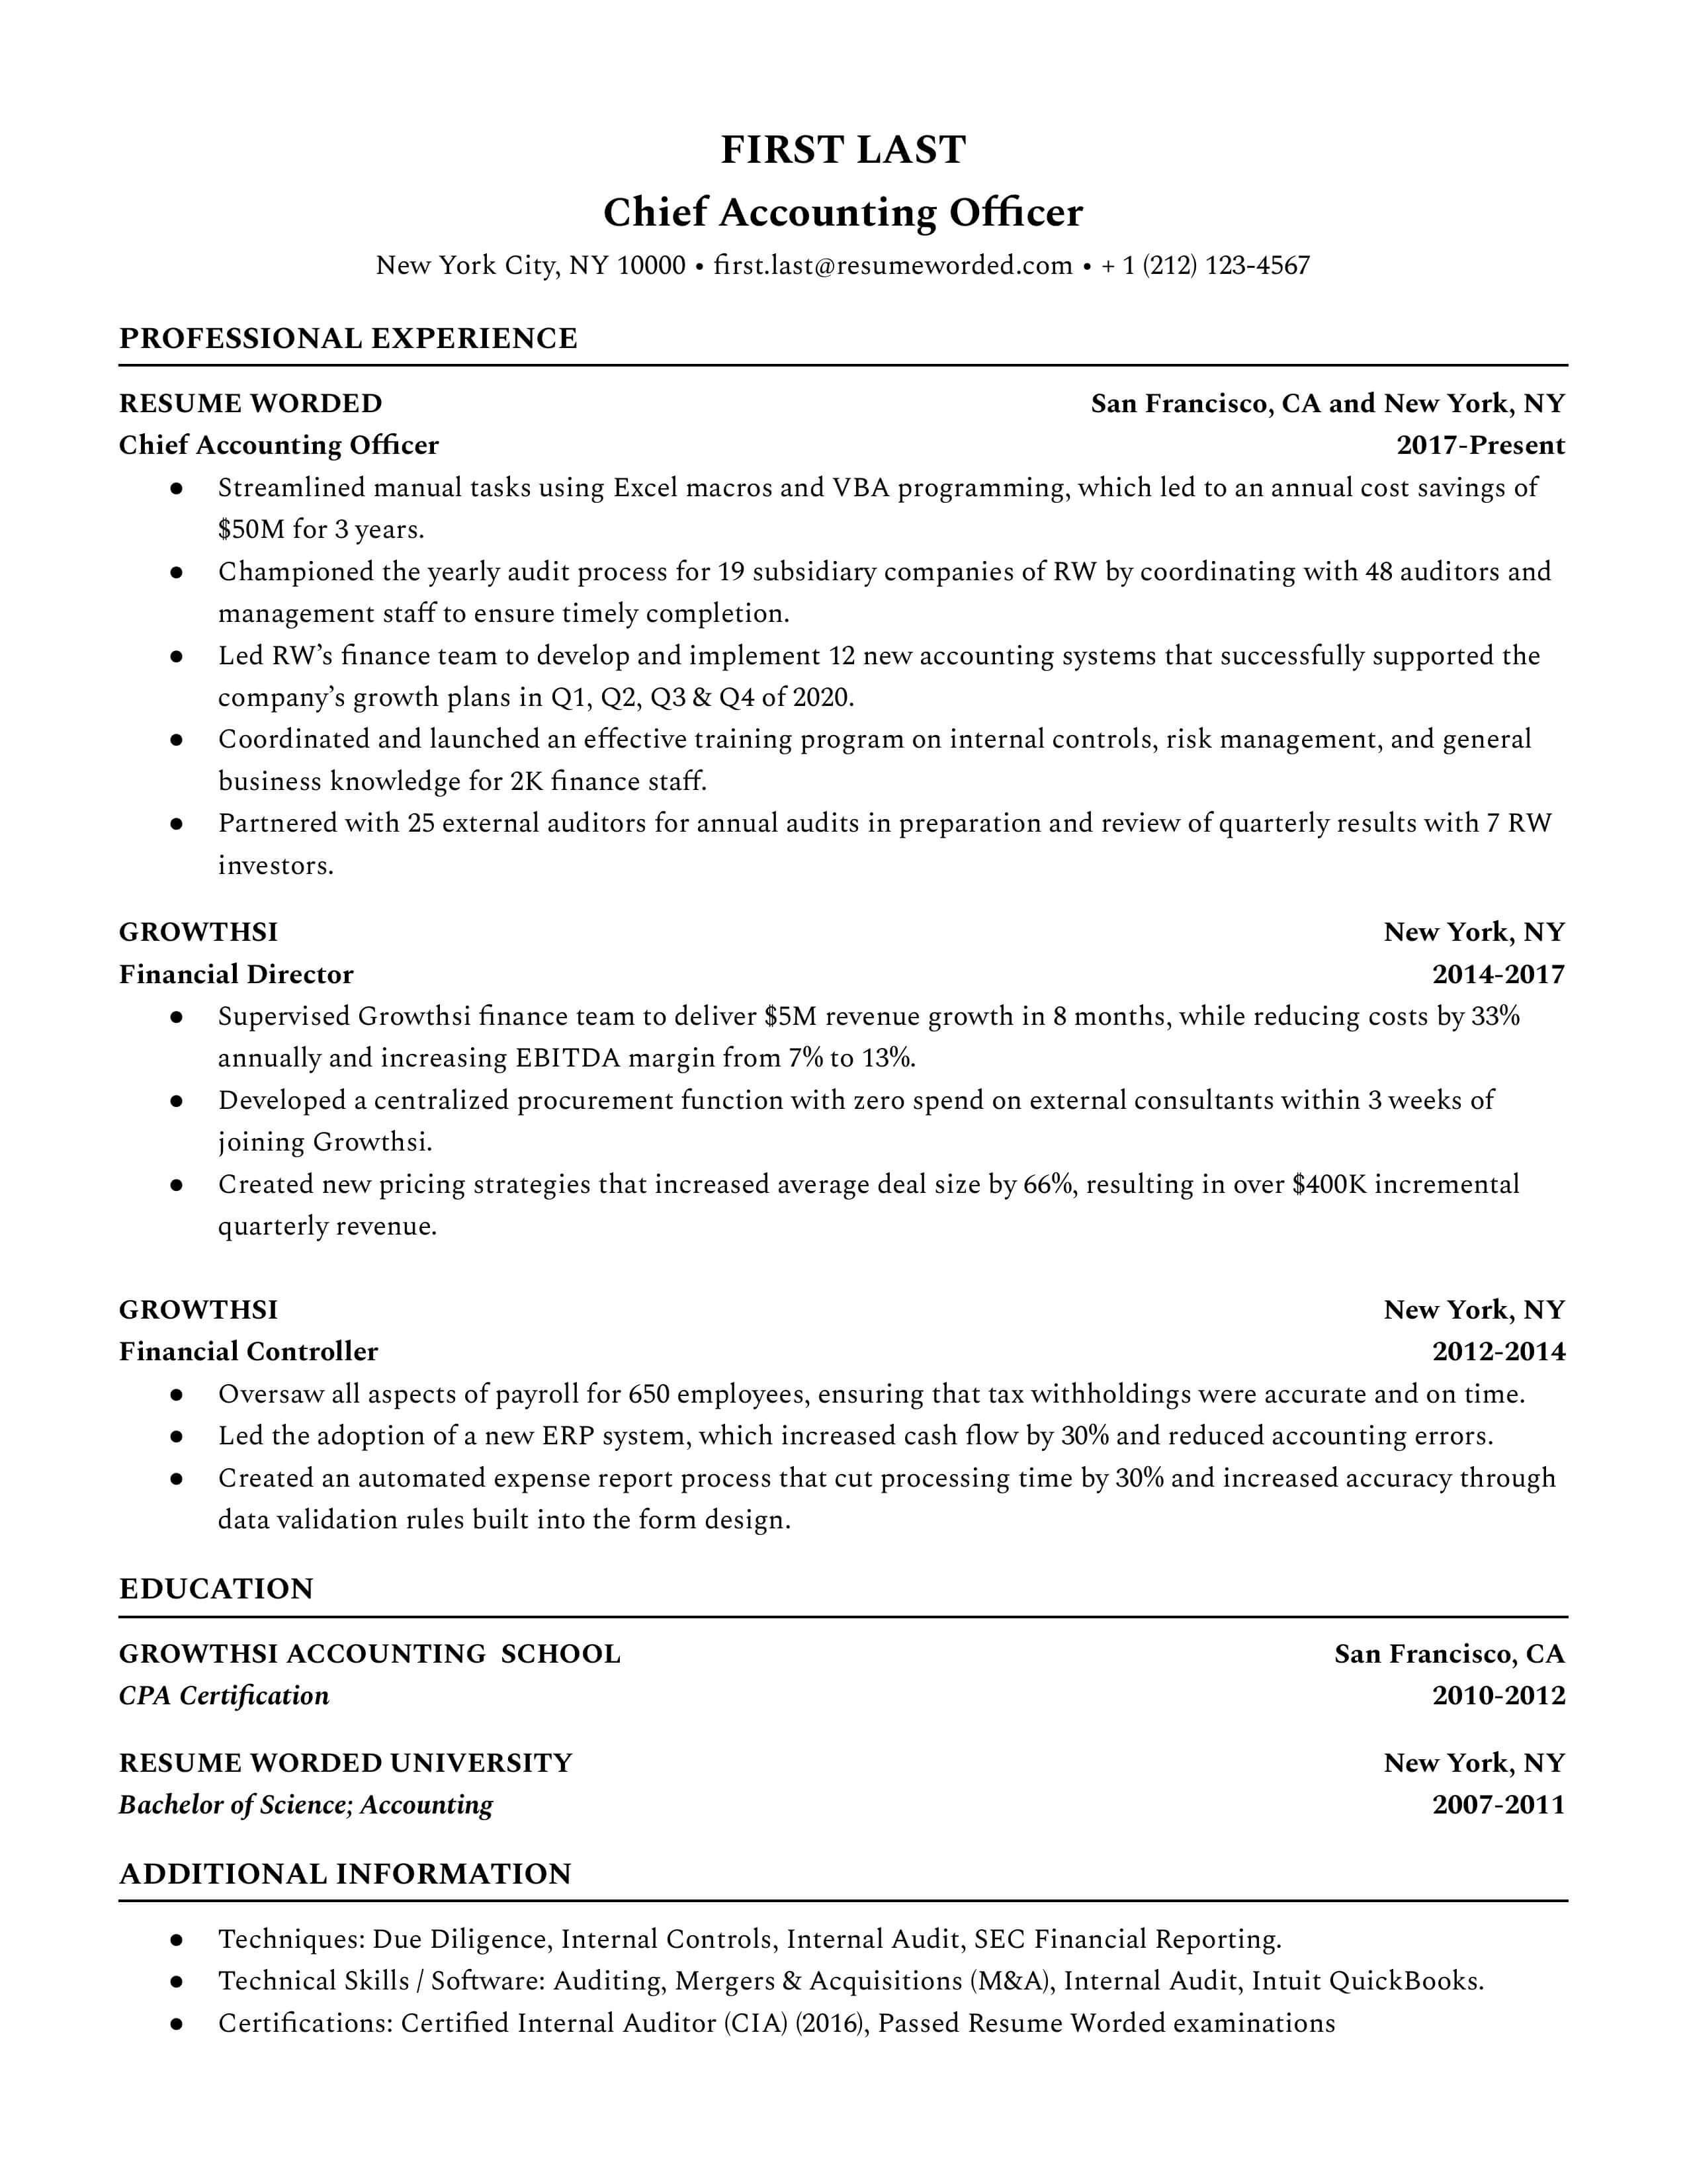 Snapshot of a Chief Accounting Officer's CV showcasing experience and skills.